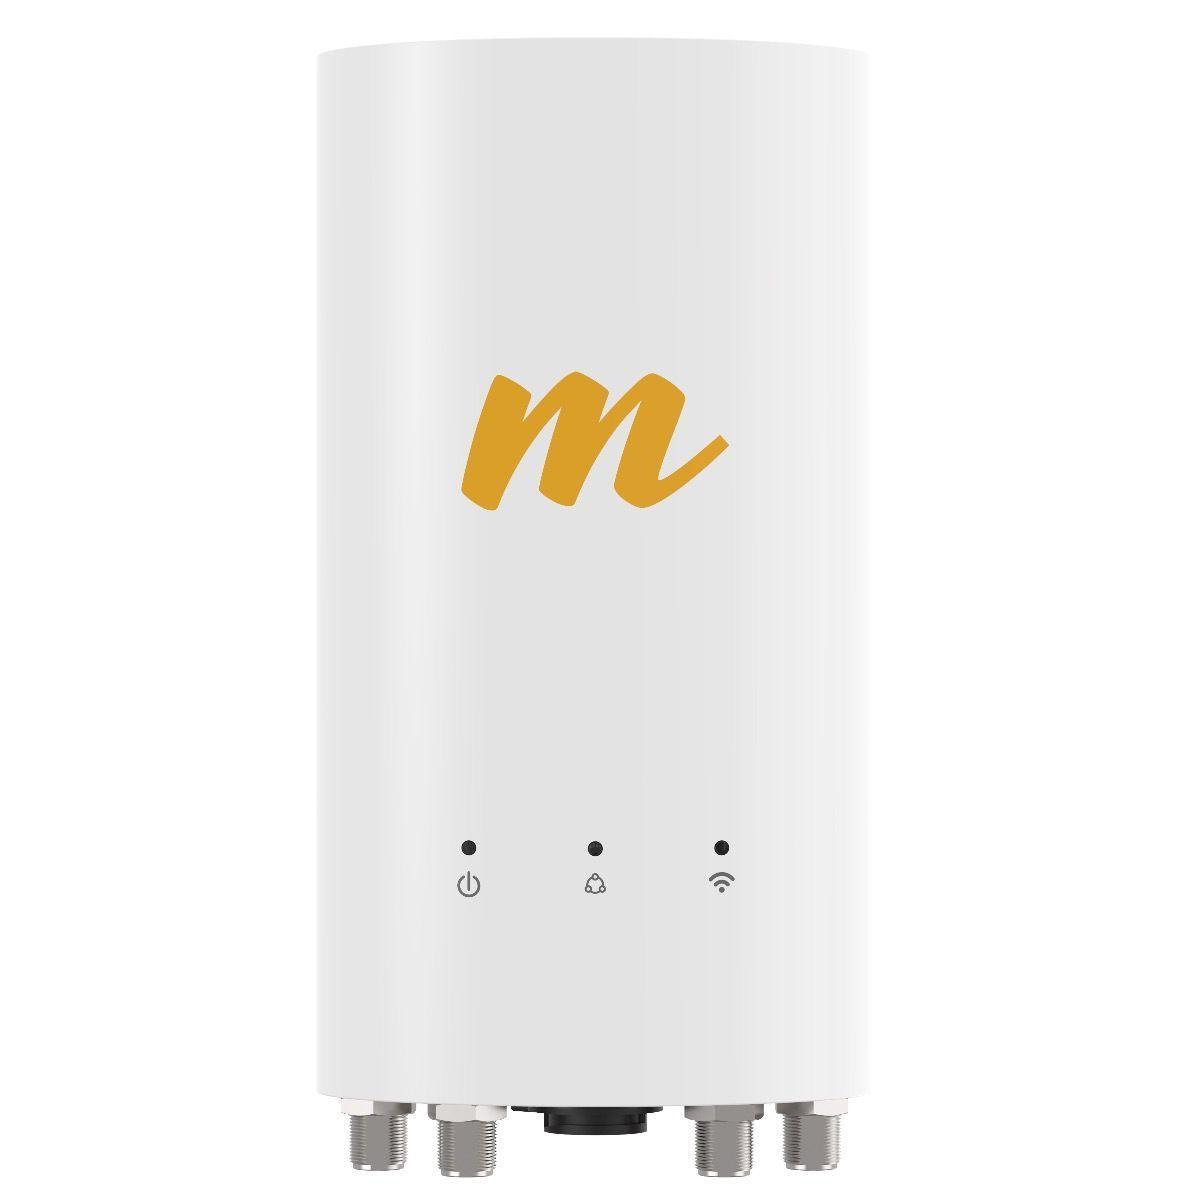 Product Mimosa A5c 5GHz Access Point Connectorized for External Antennas with 4x N-Female Connectors, 4x4:4 MIMO OFDM, GPS Synchronization - GreenLine Technologies image